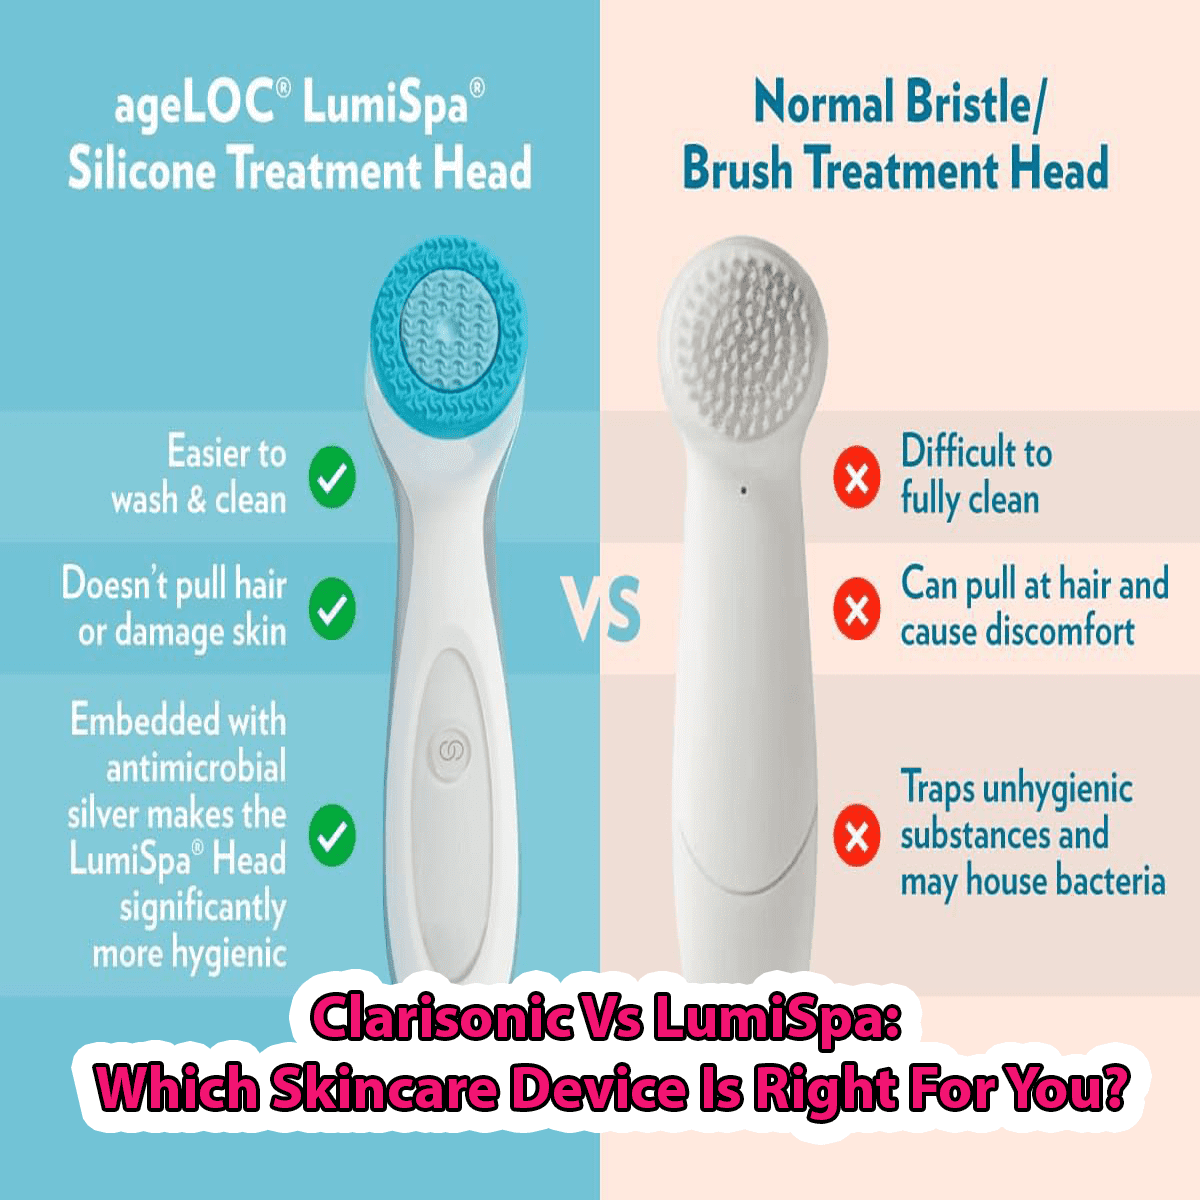 clarisonic-vs-lumispa-which-skincare-device-is-right-for-you_